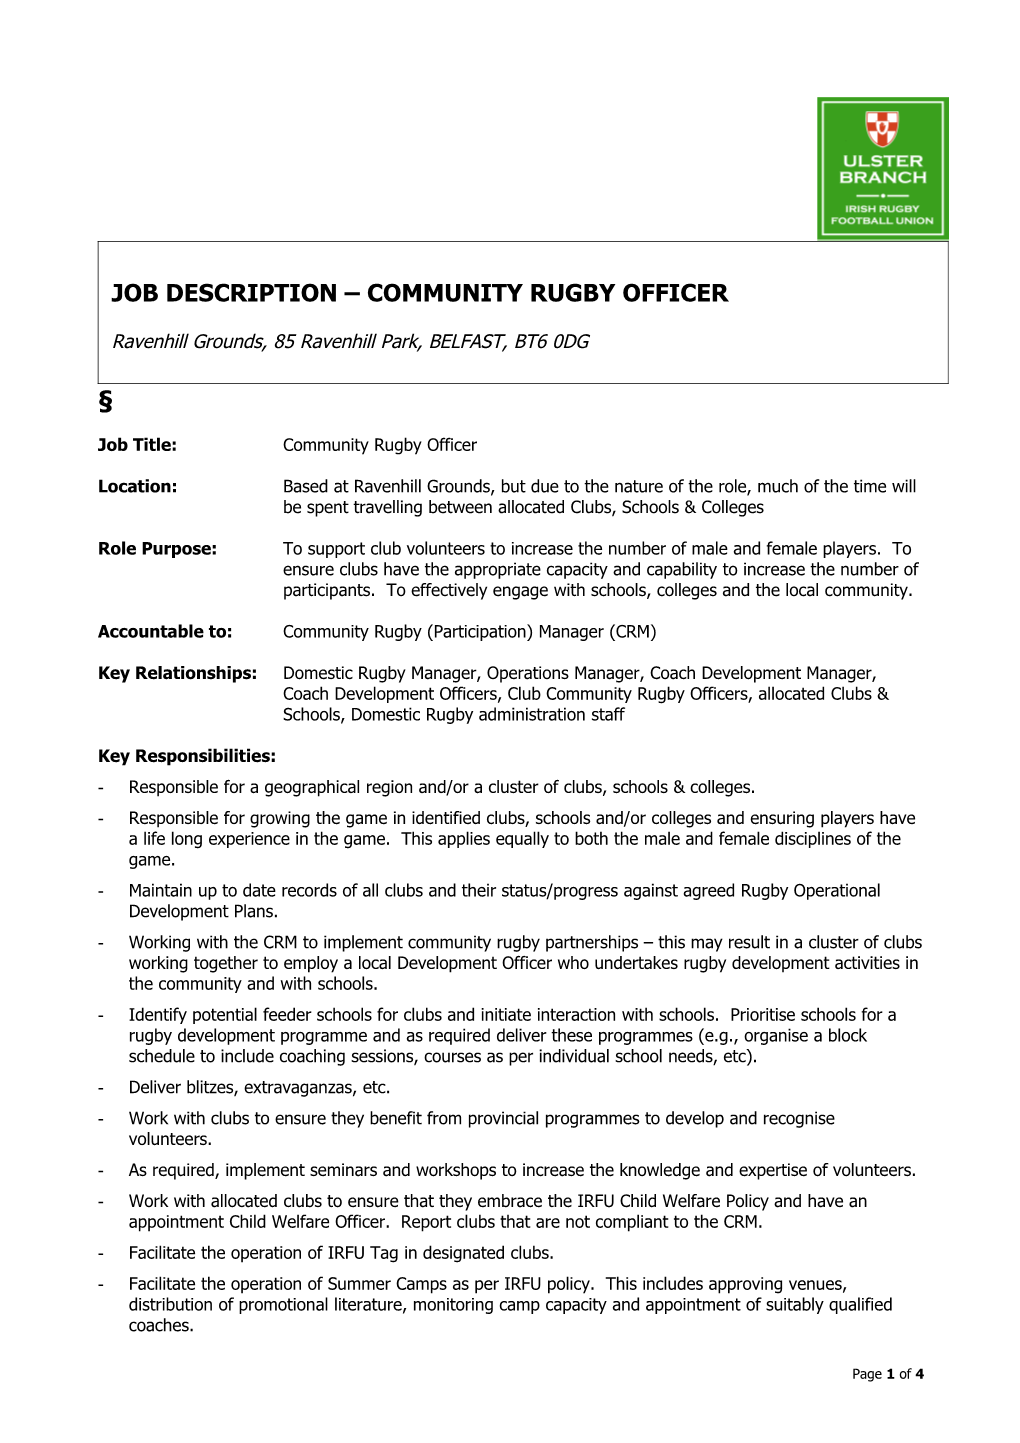 Job Title: Community Rugby Officer